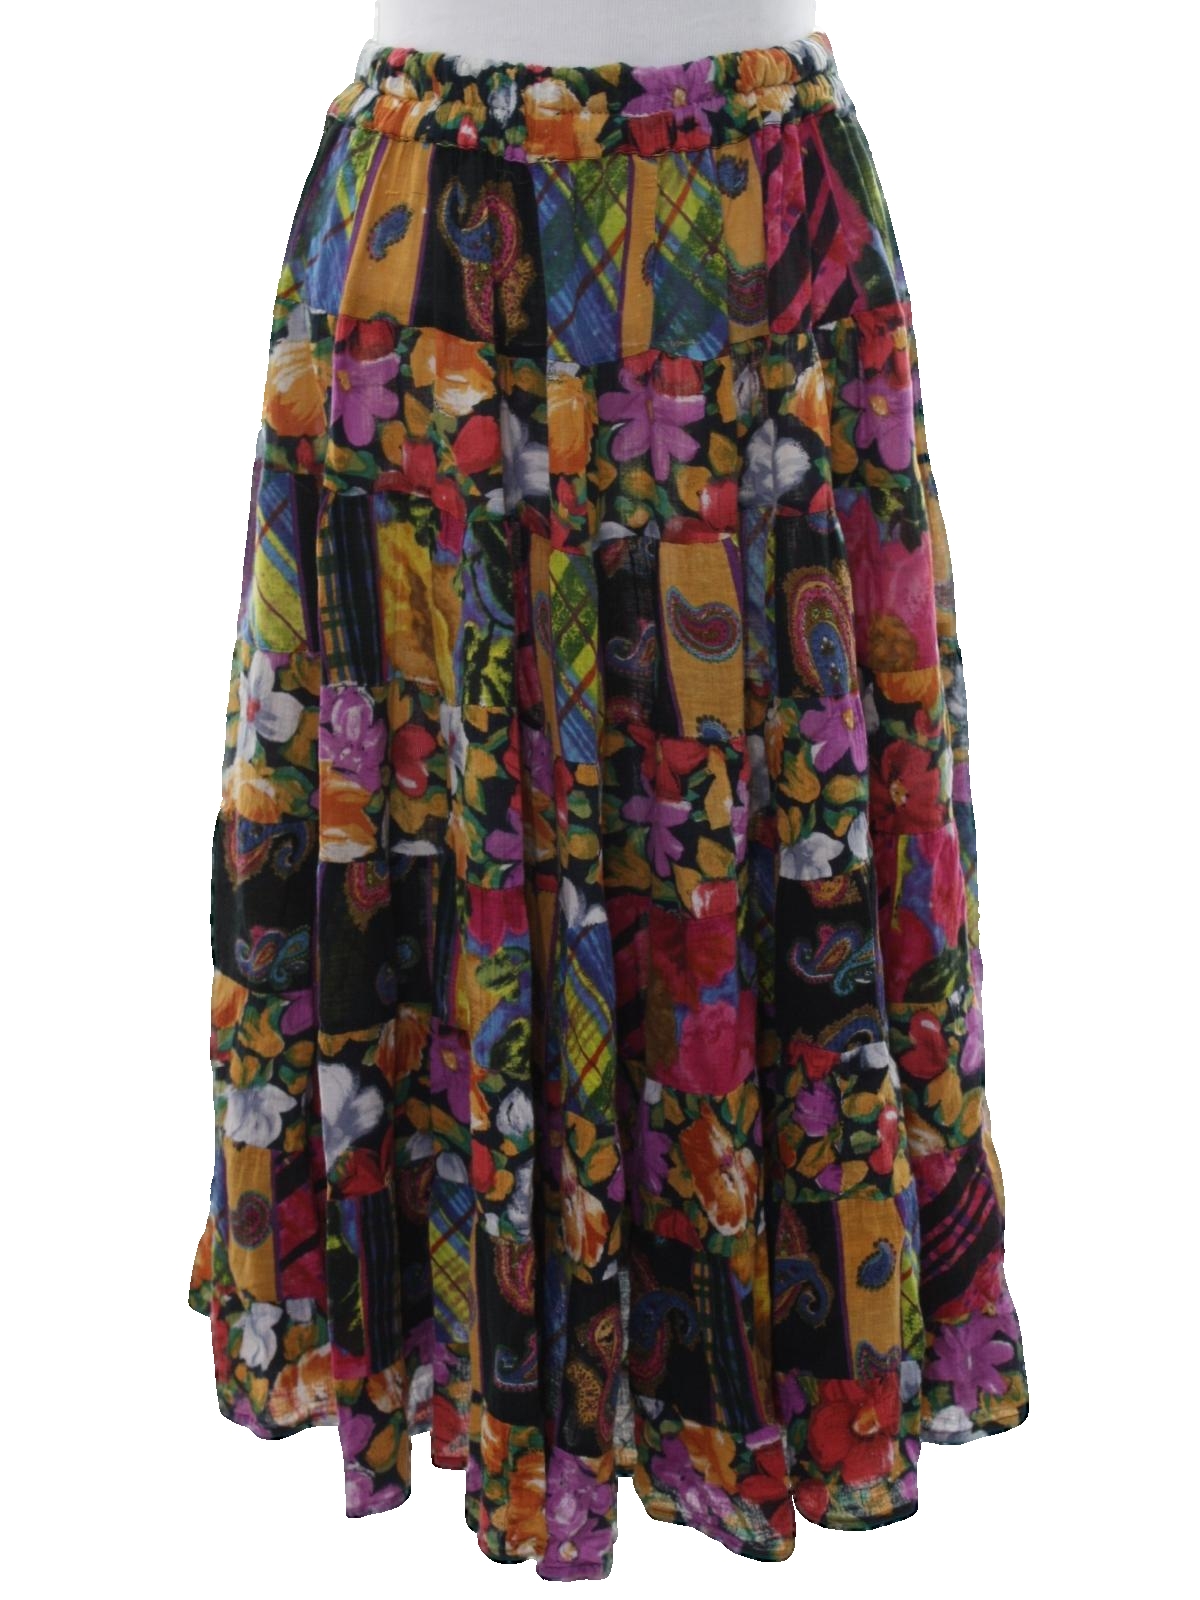 Vintage 1990s Hippie Skirt: 90s -No Label- Womens multi color rayon ...